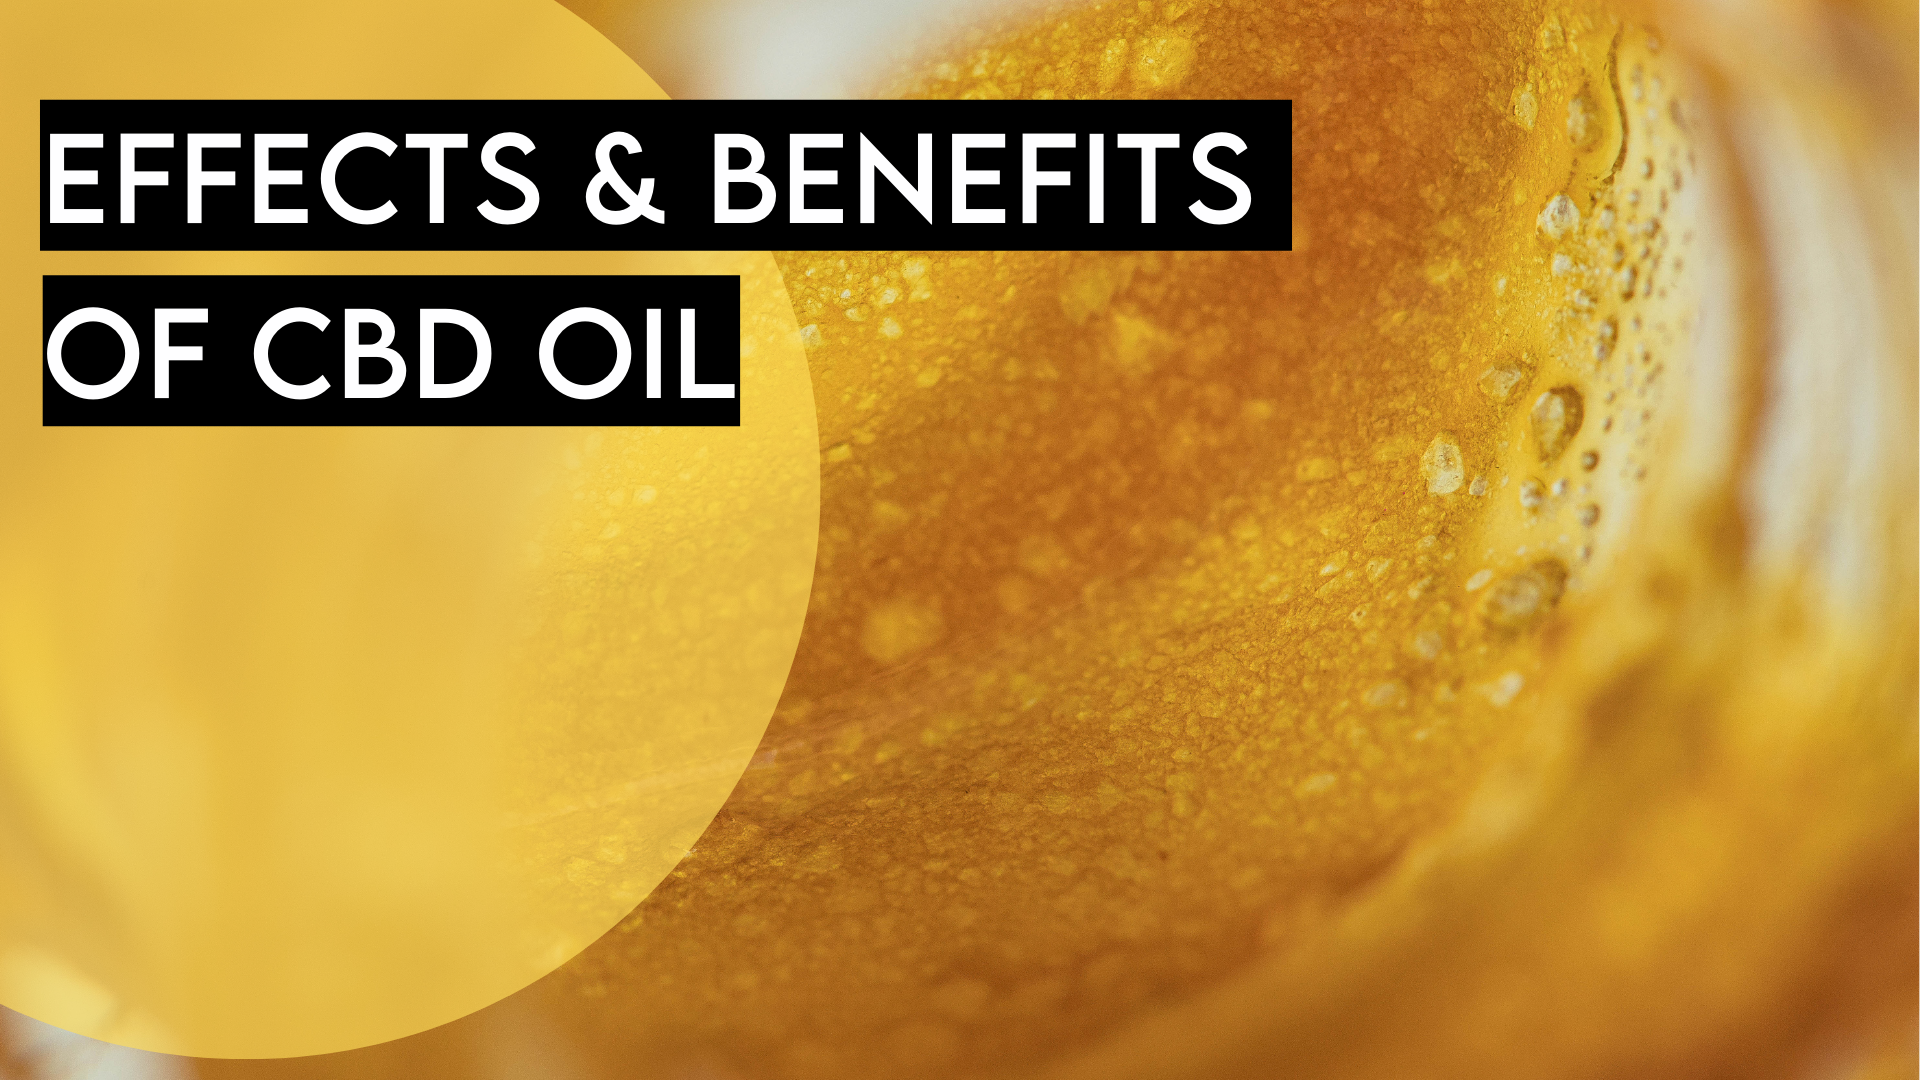 What Are the Effects & Benefits of CBD Oil?